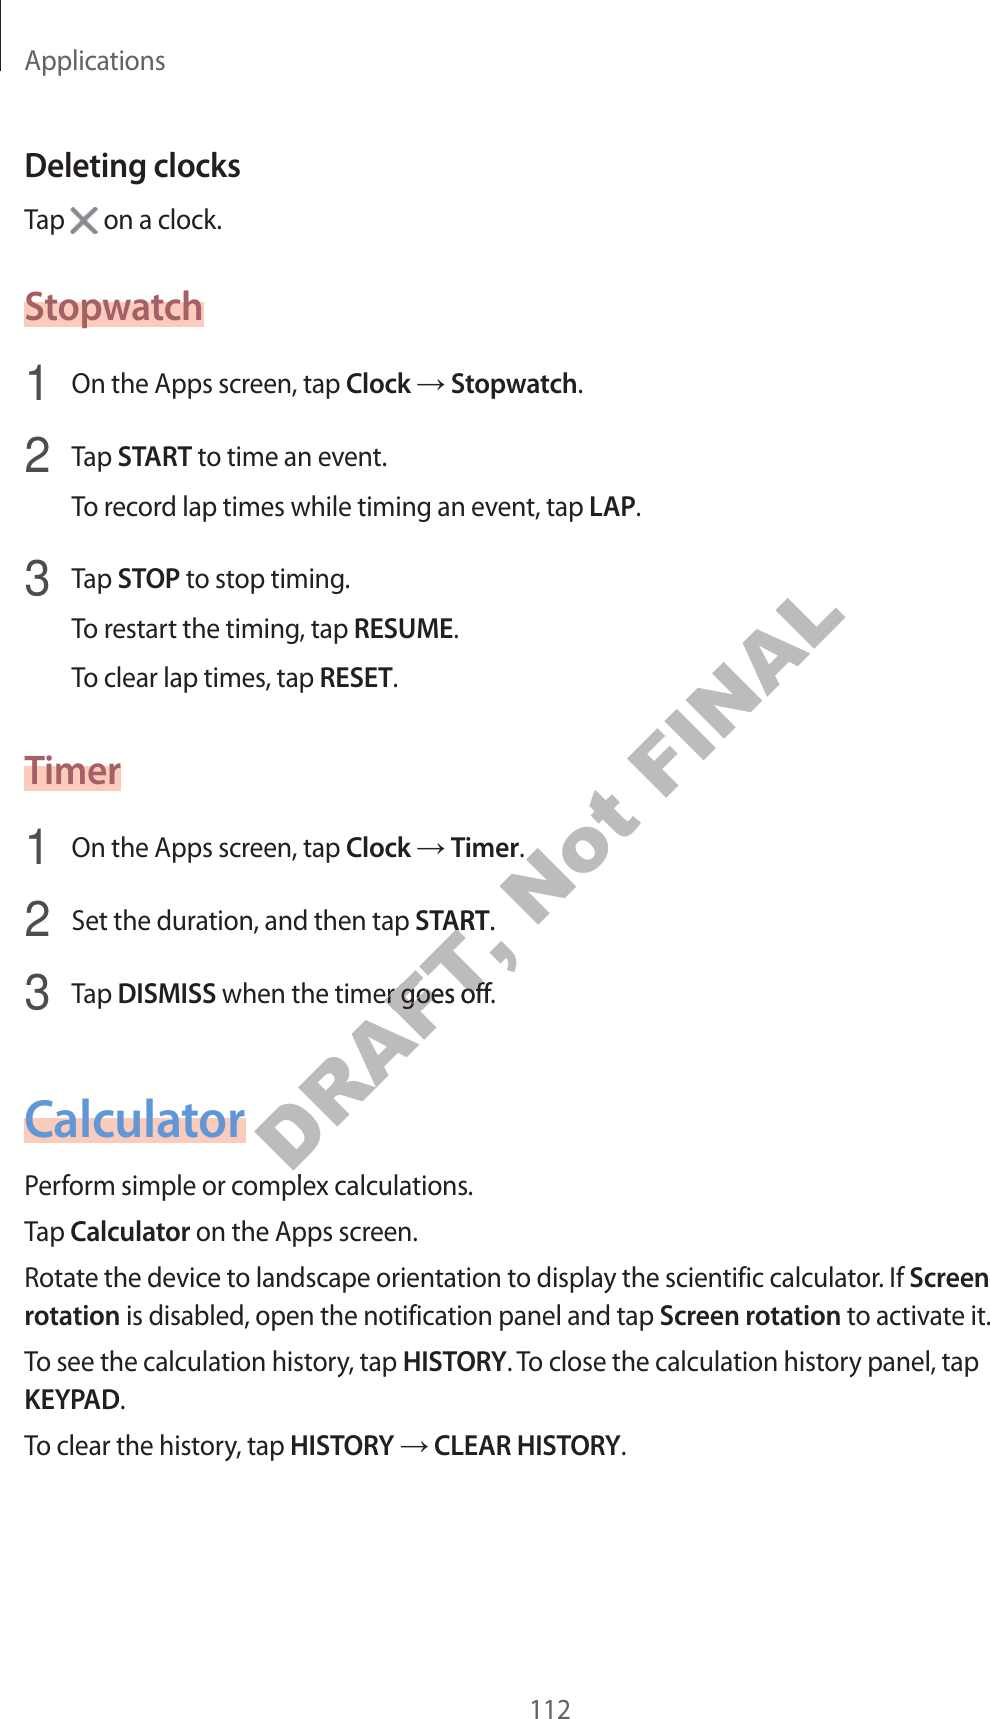 Applications112Deleting clocksTap   on a clock.Stopwatch1  On the Apps screen, tap Clock  Stopwatch.2  Tap START to time an event.To record lap times while timing an event, tap LAP.3  Tap STOP to stop timing.To restart the timing, tap RESUME.To clear lap times, tap RESET.Timer1  On the Apps screen, tap Clock  Timer.2  Set the duration, and then tap START.3  Tap DISMISS when the timer goes off.CalculatorPerform simple or complex calculations.Tap Calculator on the Apps screen.Rotate the device to landscape orientation to display the scientific calculator. If Screen rotation is disabled, open the notification panel and tap Screen rotation to activate it.To see the calculation history, tap HISTORY. To close the calculation history panel, tap KEYPAD.To clear the history, tap HISTORY  CLEAR HISTORY.DRAFT, STARTSTAR. when the timer goes off. when the timer goes offomplex calculaNot FINAL